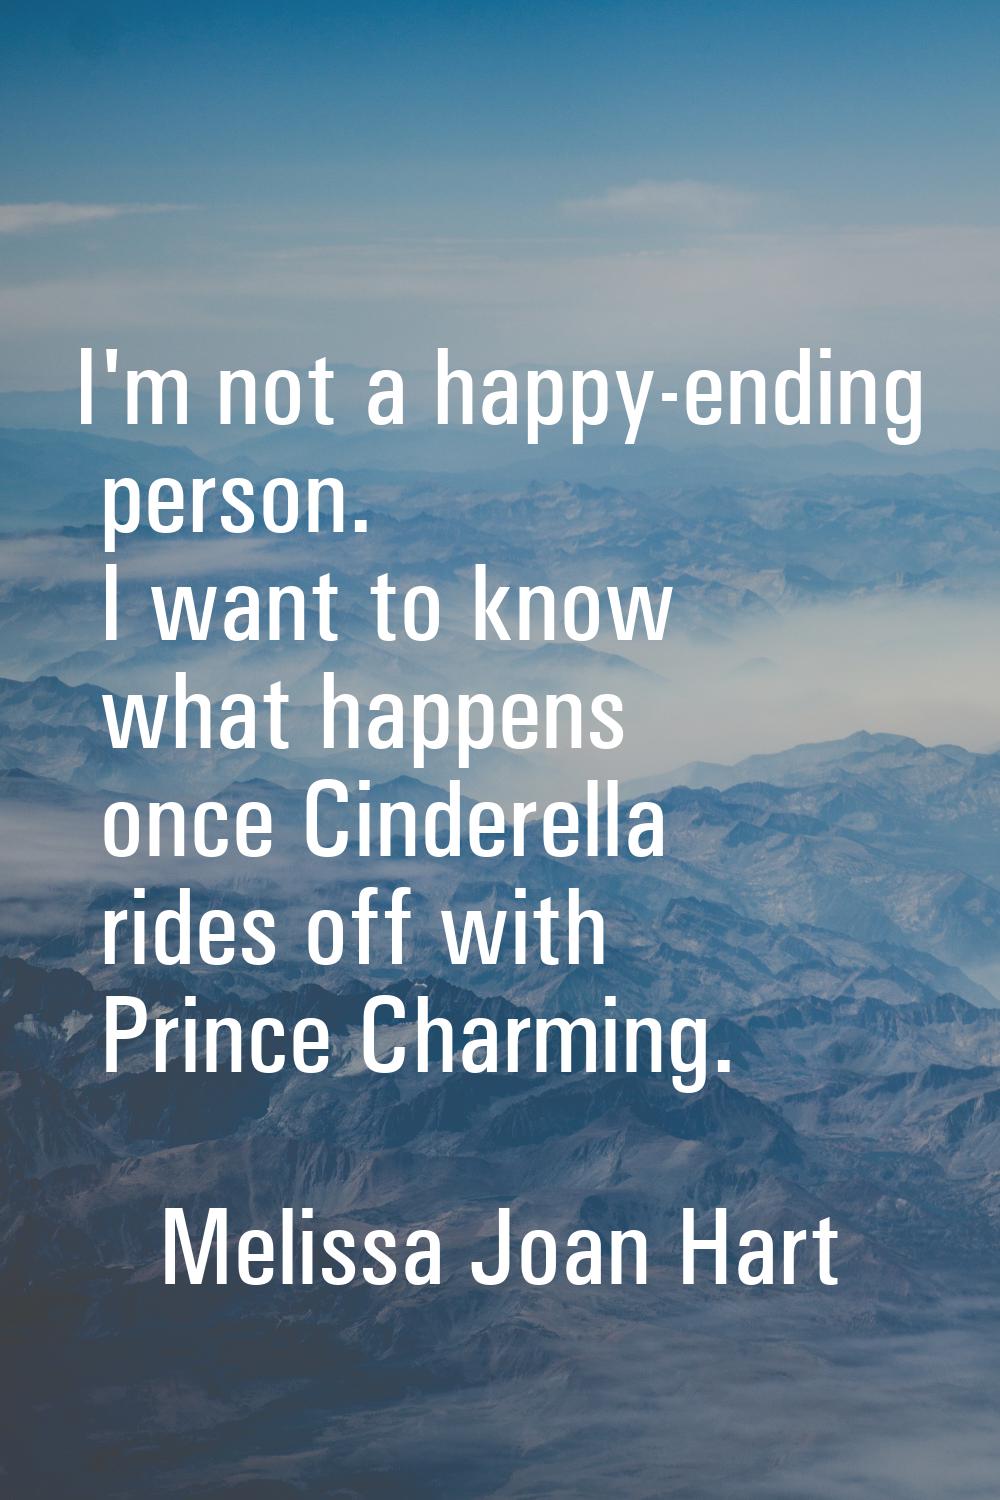 I'm not a happy-ending person. I want to know what happens once Cinderella rides off with Prince Ch